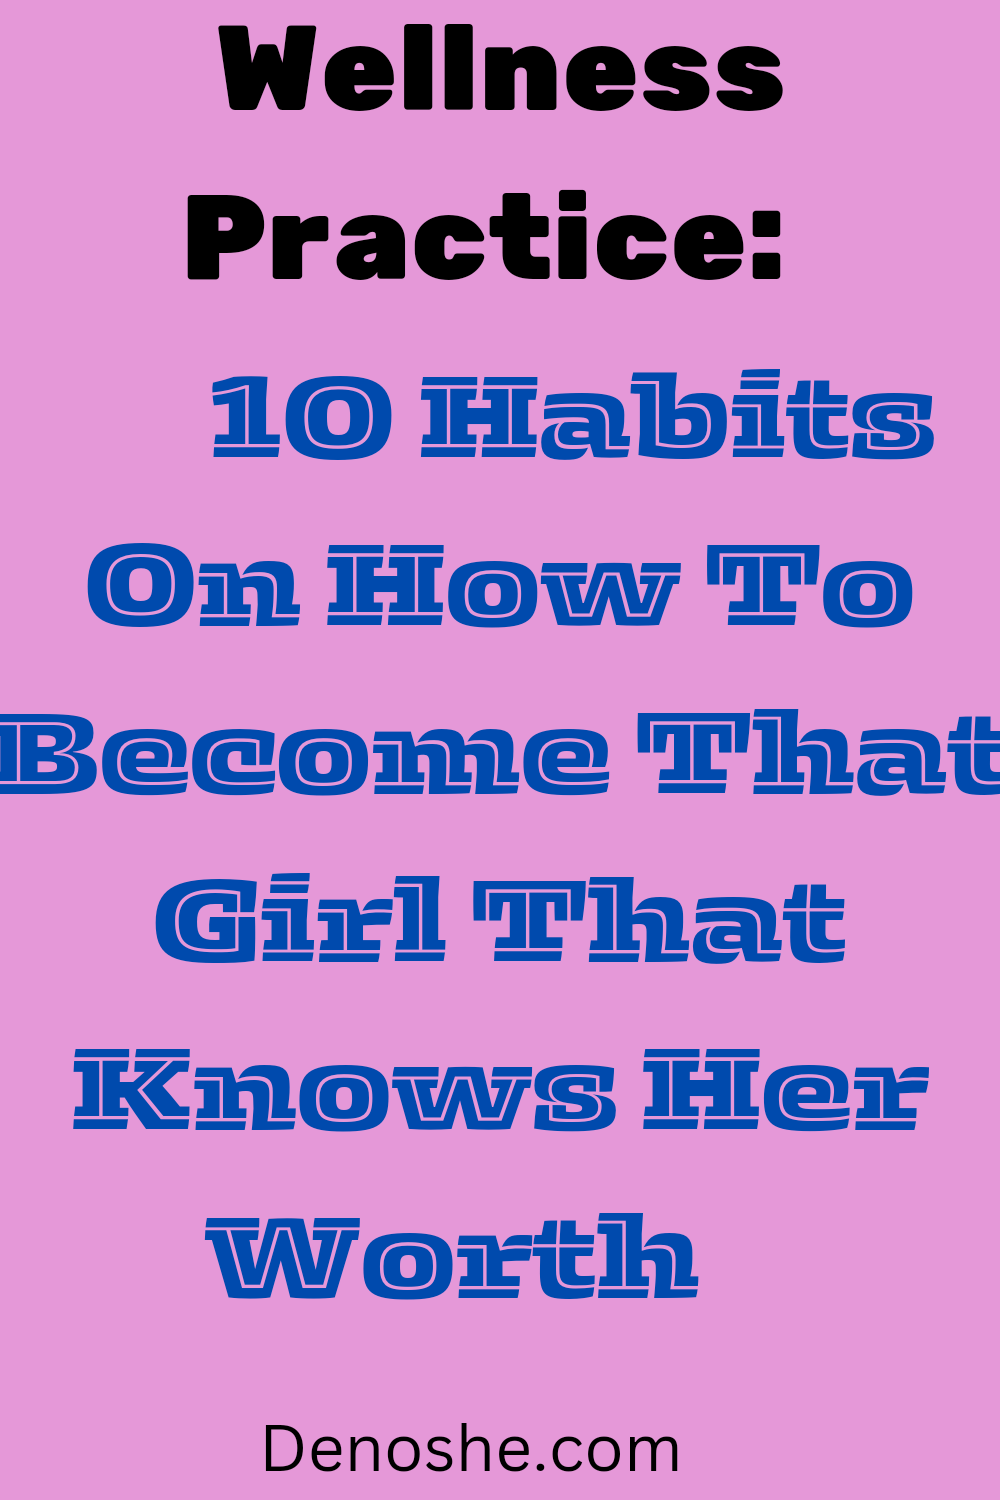  10 Habits To Become "That Girl". Wellness practice : 10 habits on how to become that girl